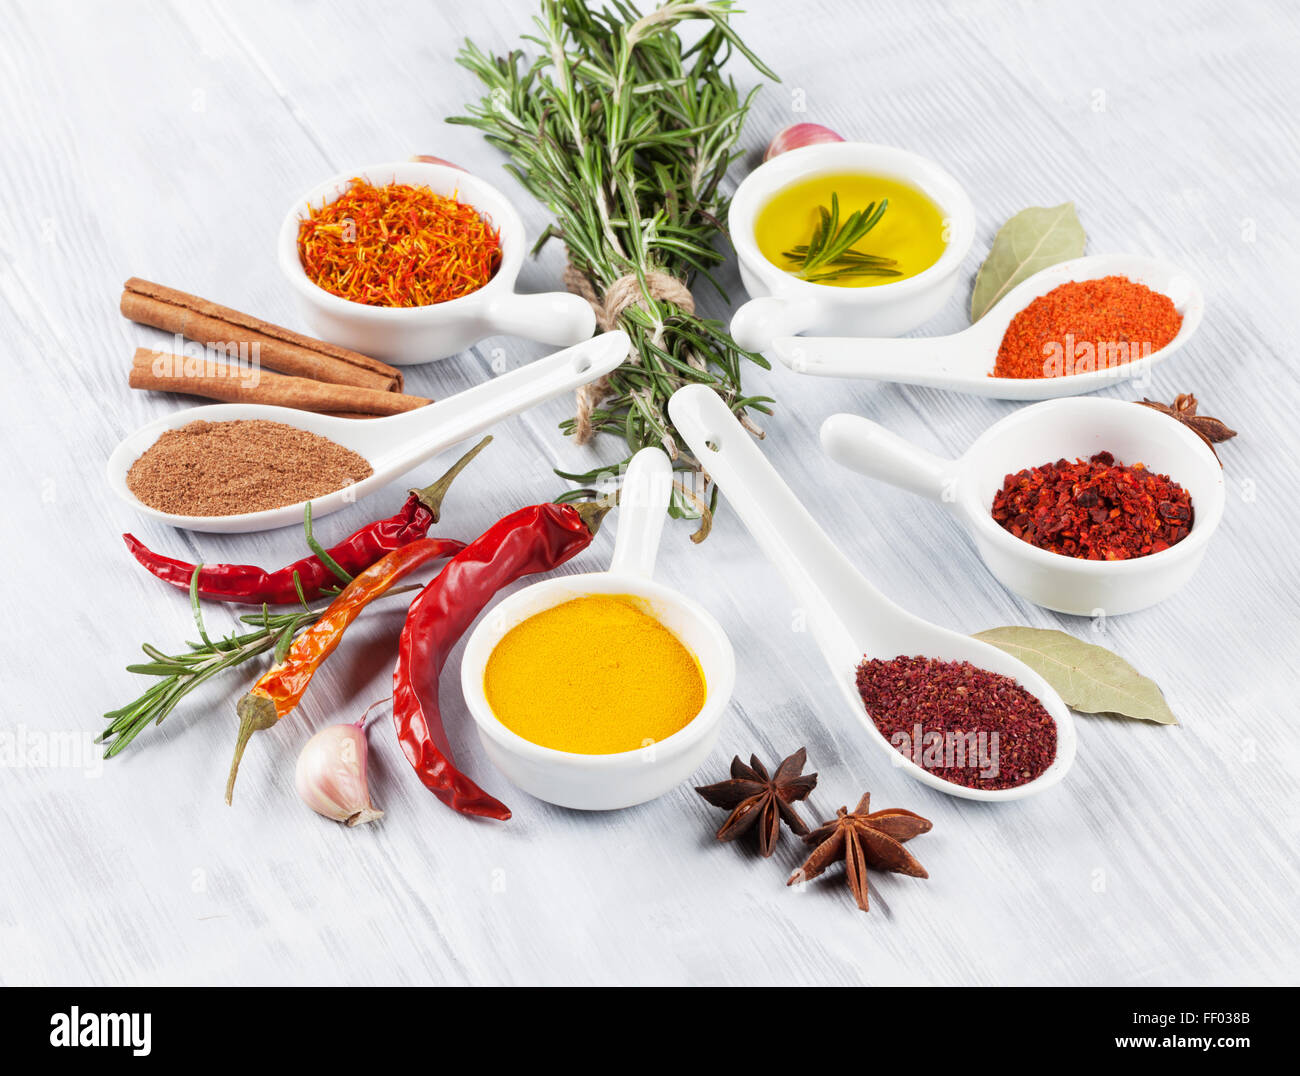 Herbs, condiments and spices on wooden background Stock Photo